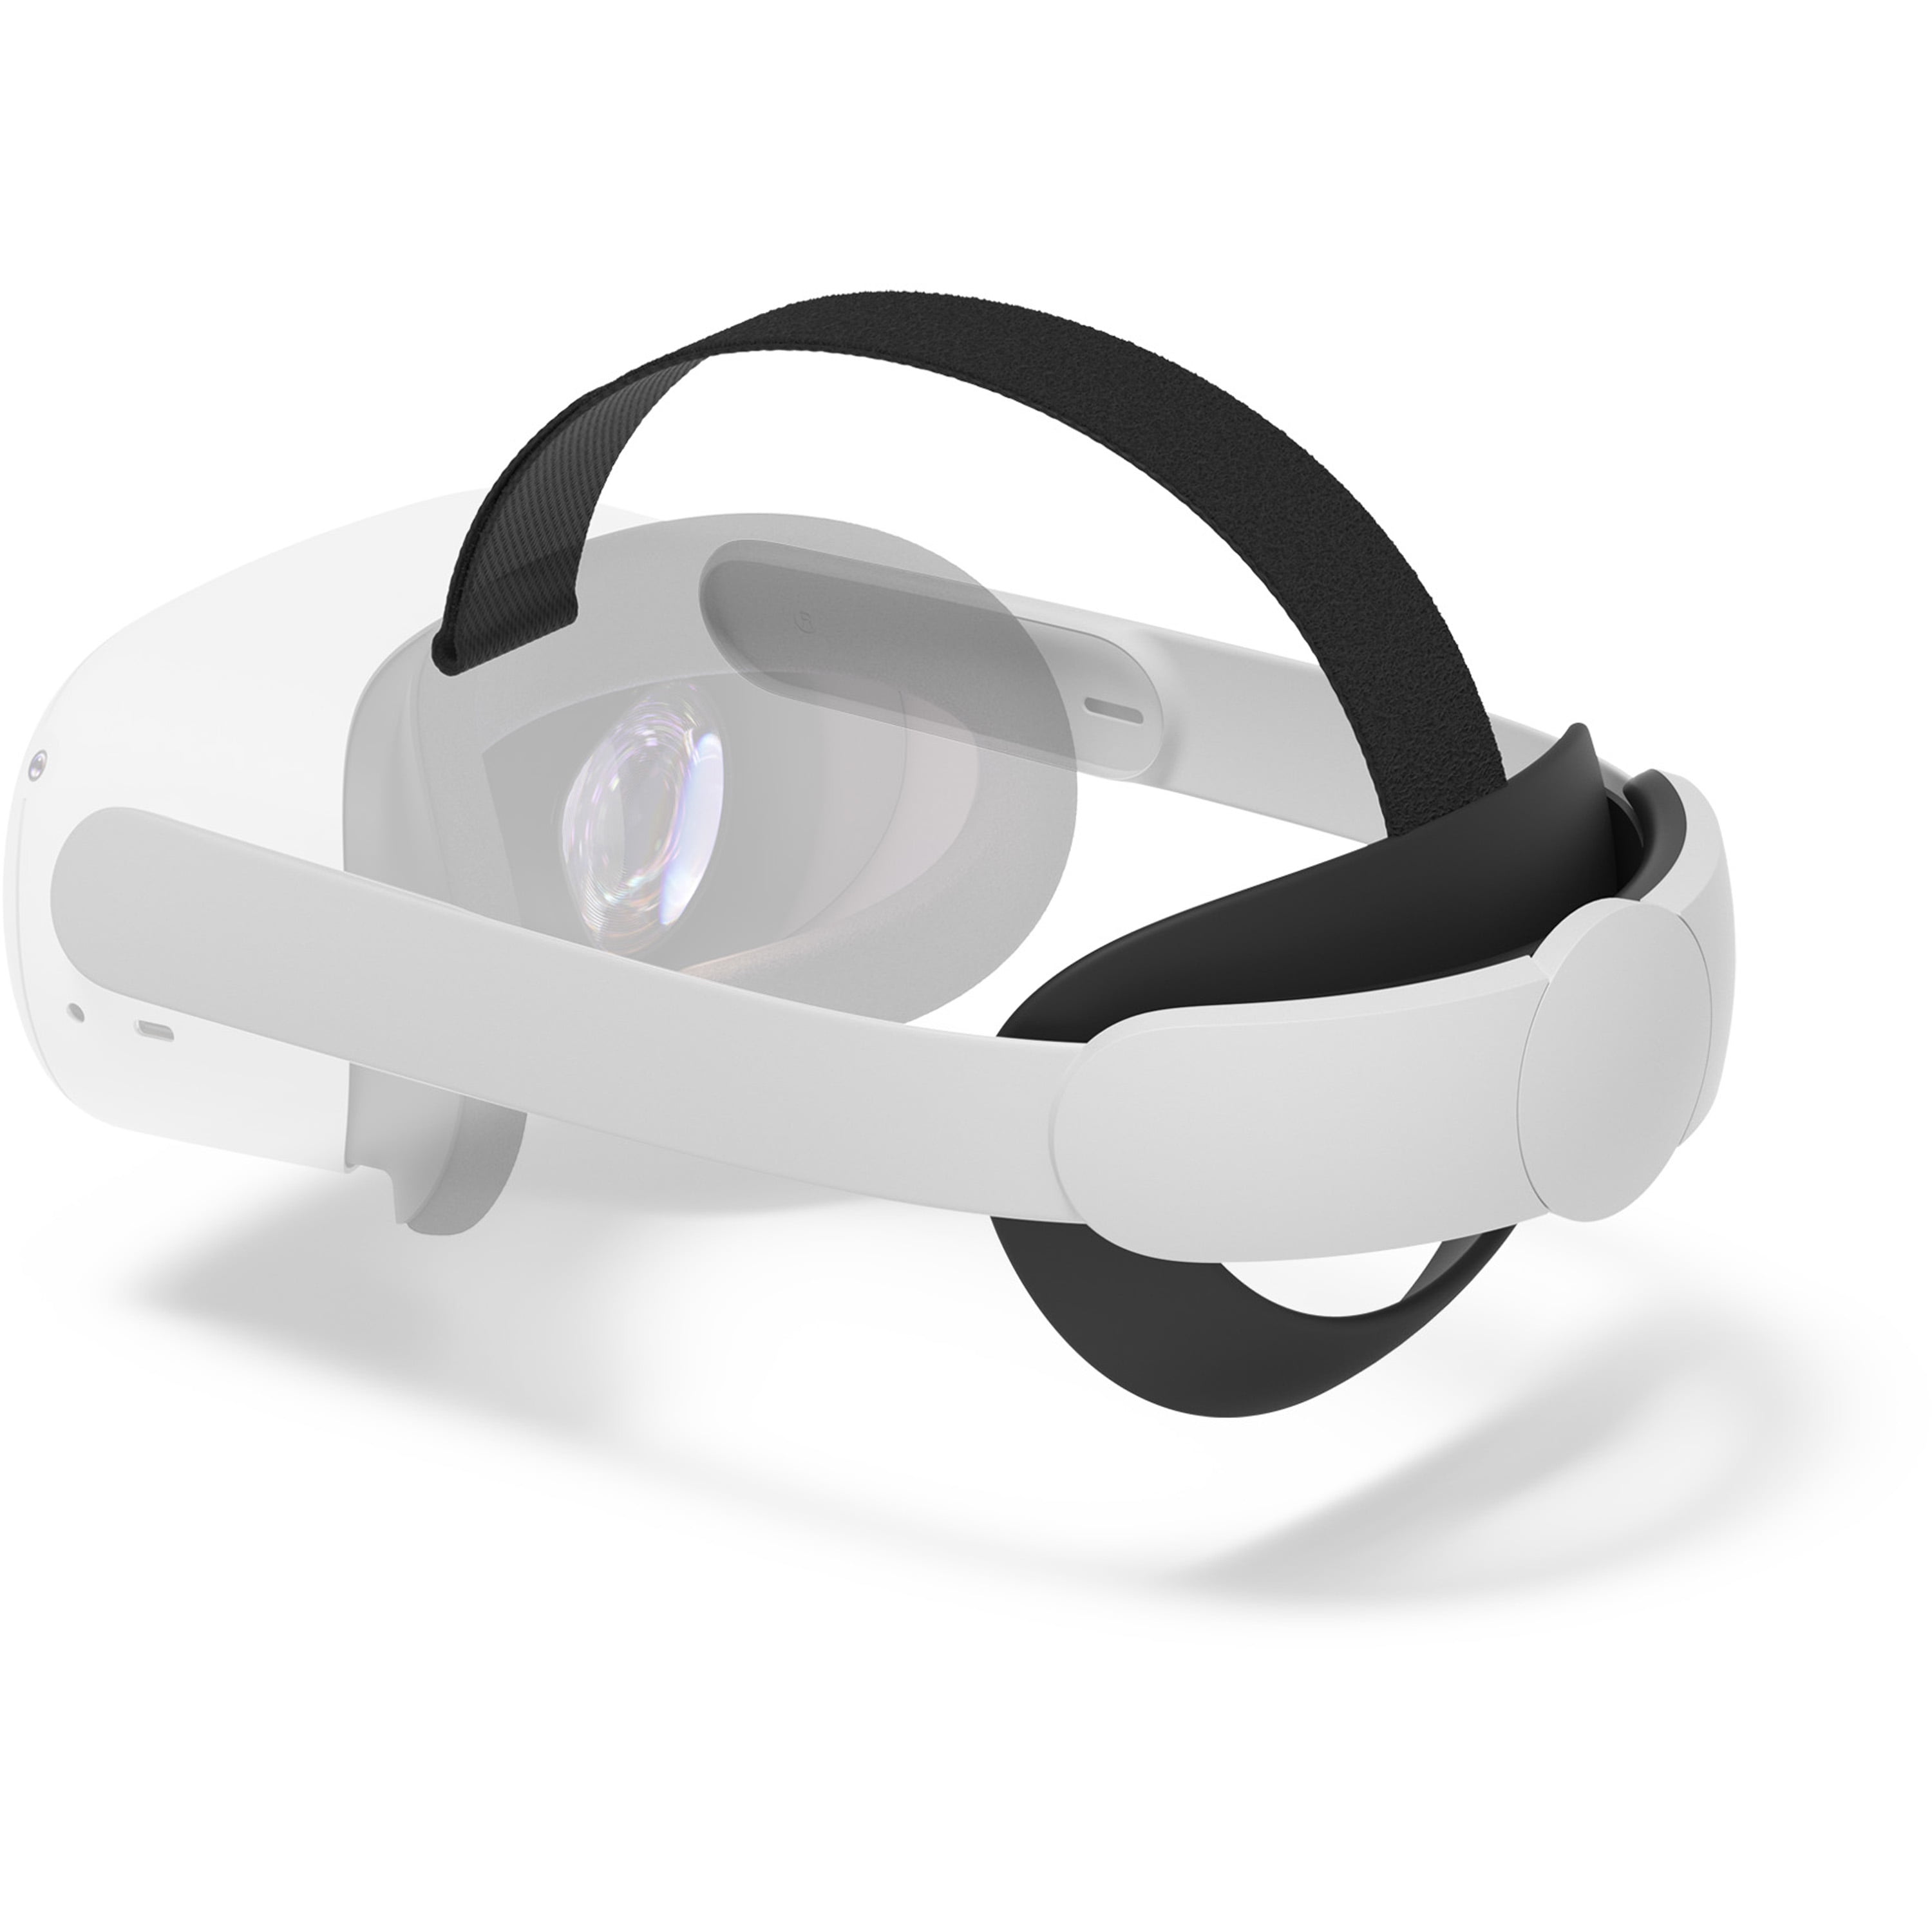 Quest 2 (Oculus) Elite Strap for Enhanced Support and Comfort in VR